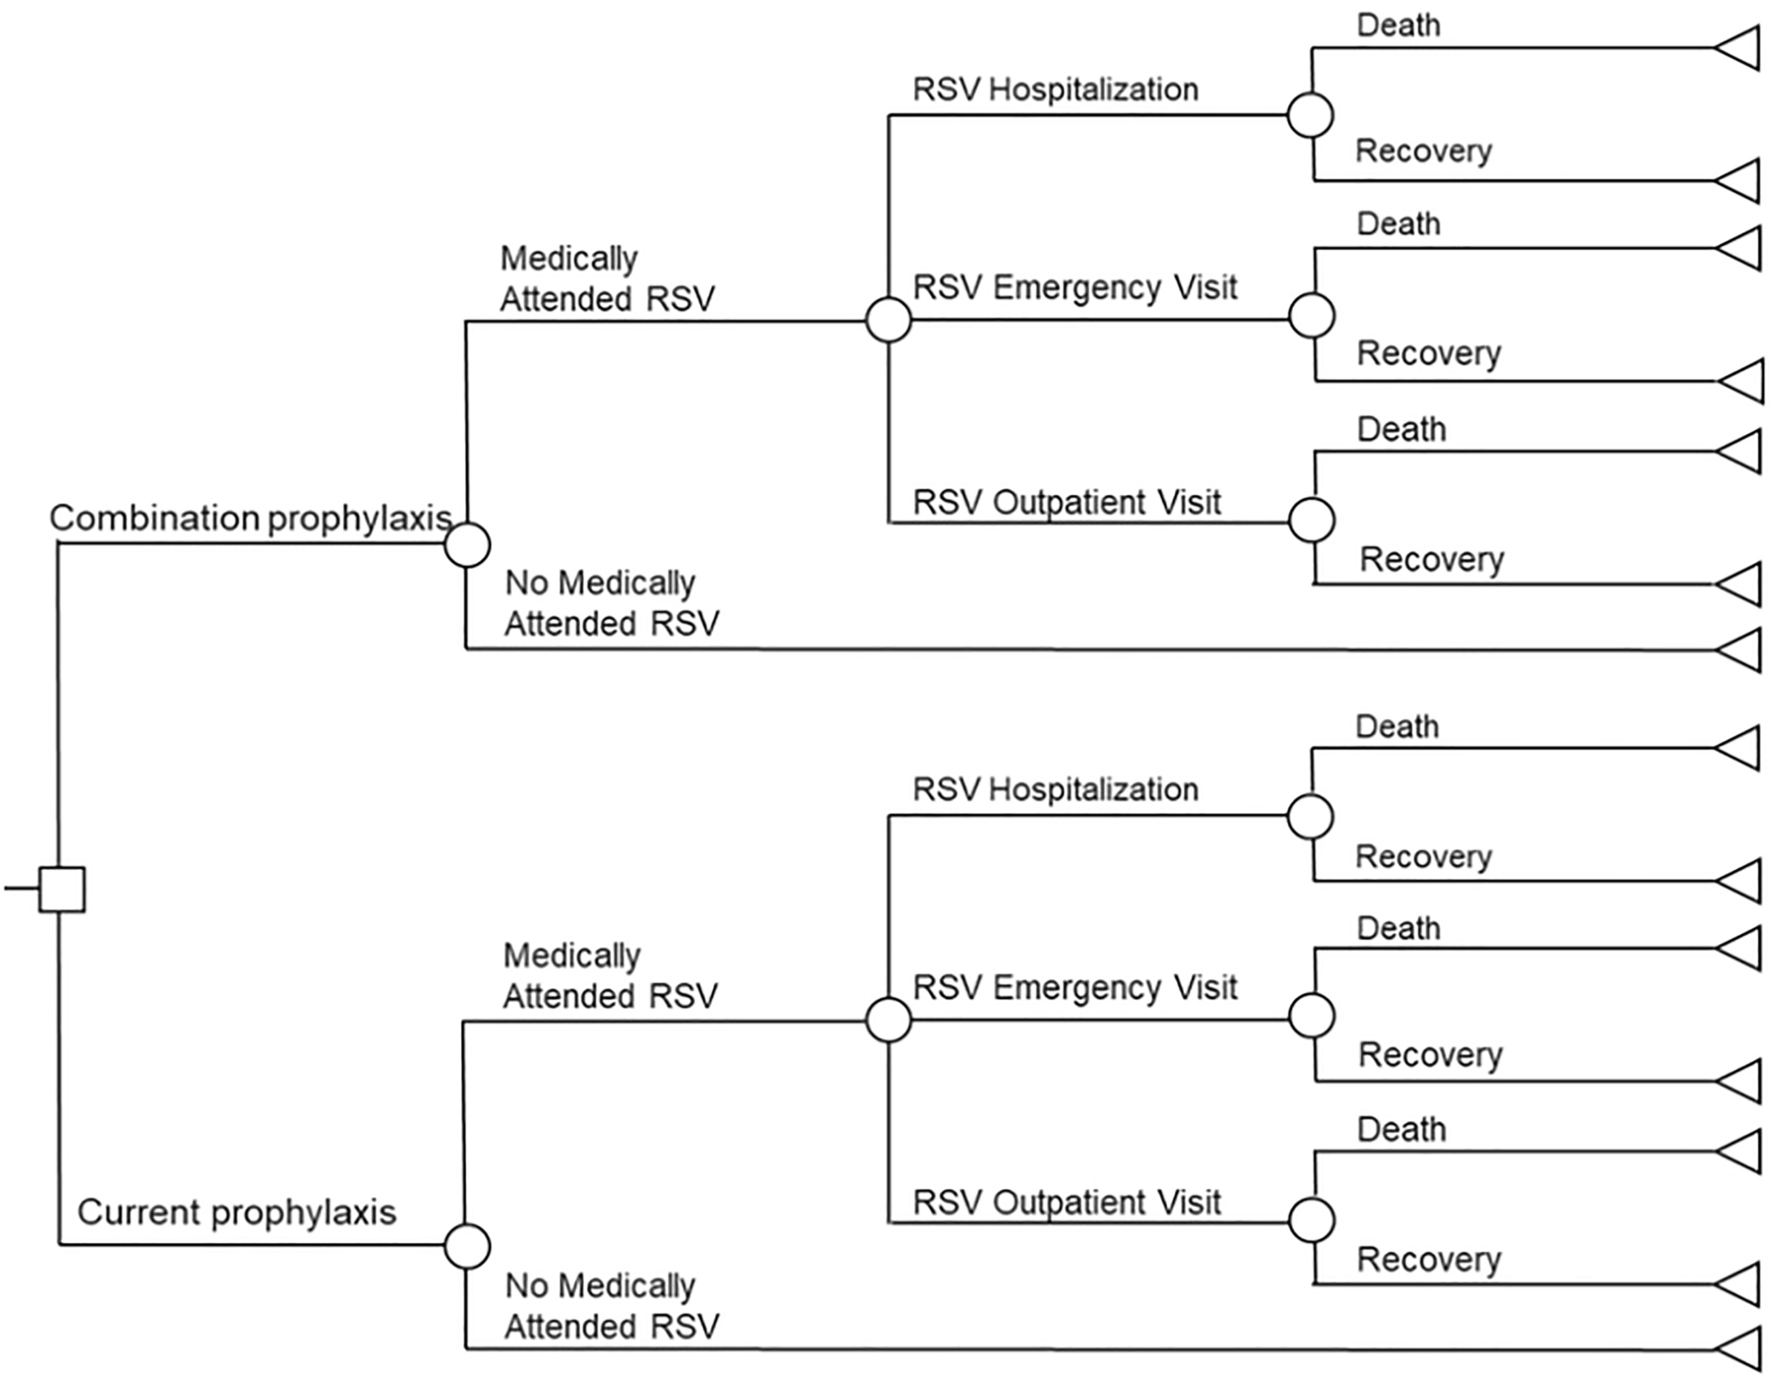 Cost-Effectiveness Analysis of Maternal Respiratory Syncytial Virus Vaccine in Protecting Infants from RSV Infection in Japan